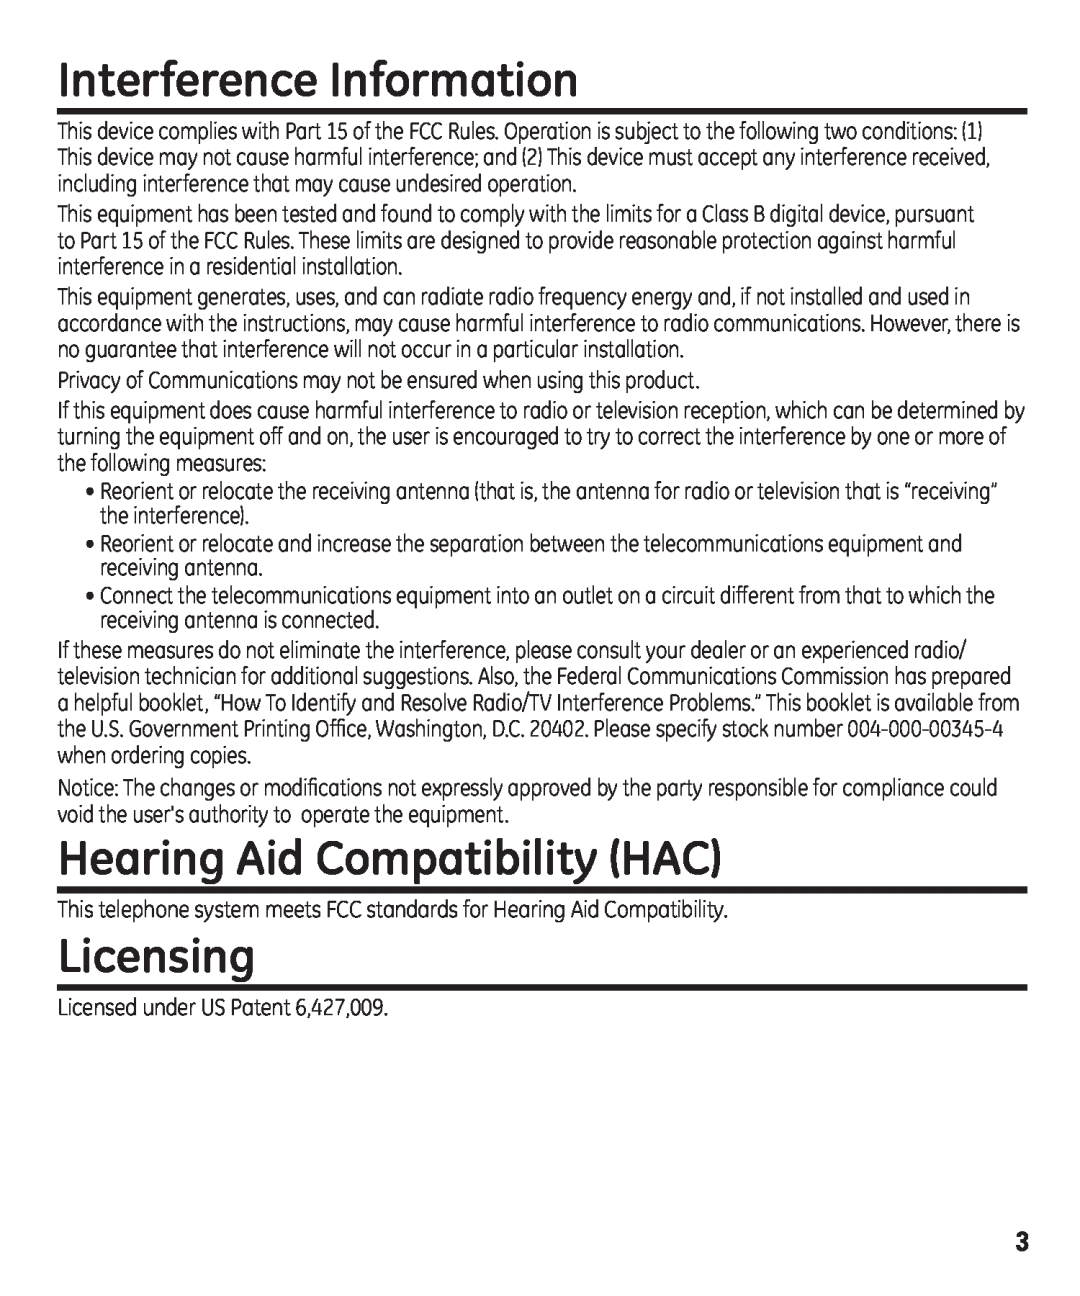 GE 29861 manual Interference Information, Hearing Aid Compatibility HAC, Licensing 